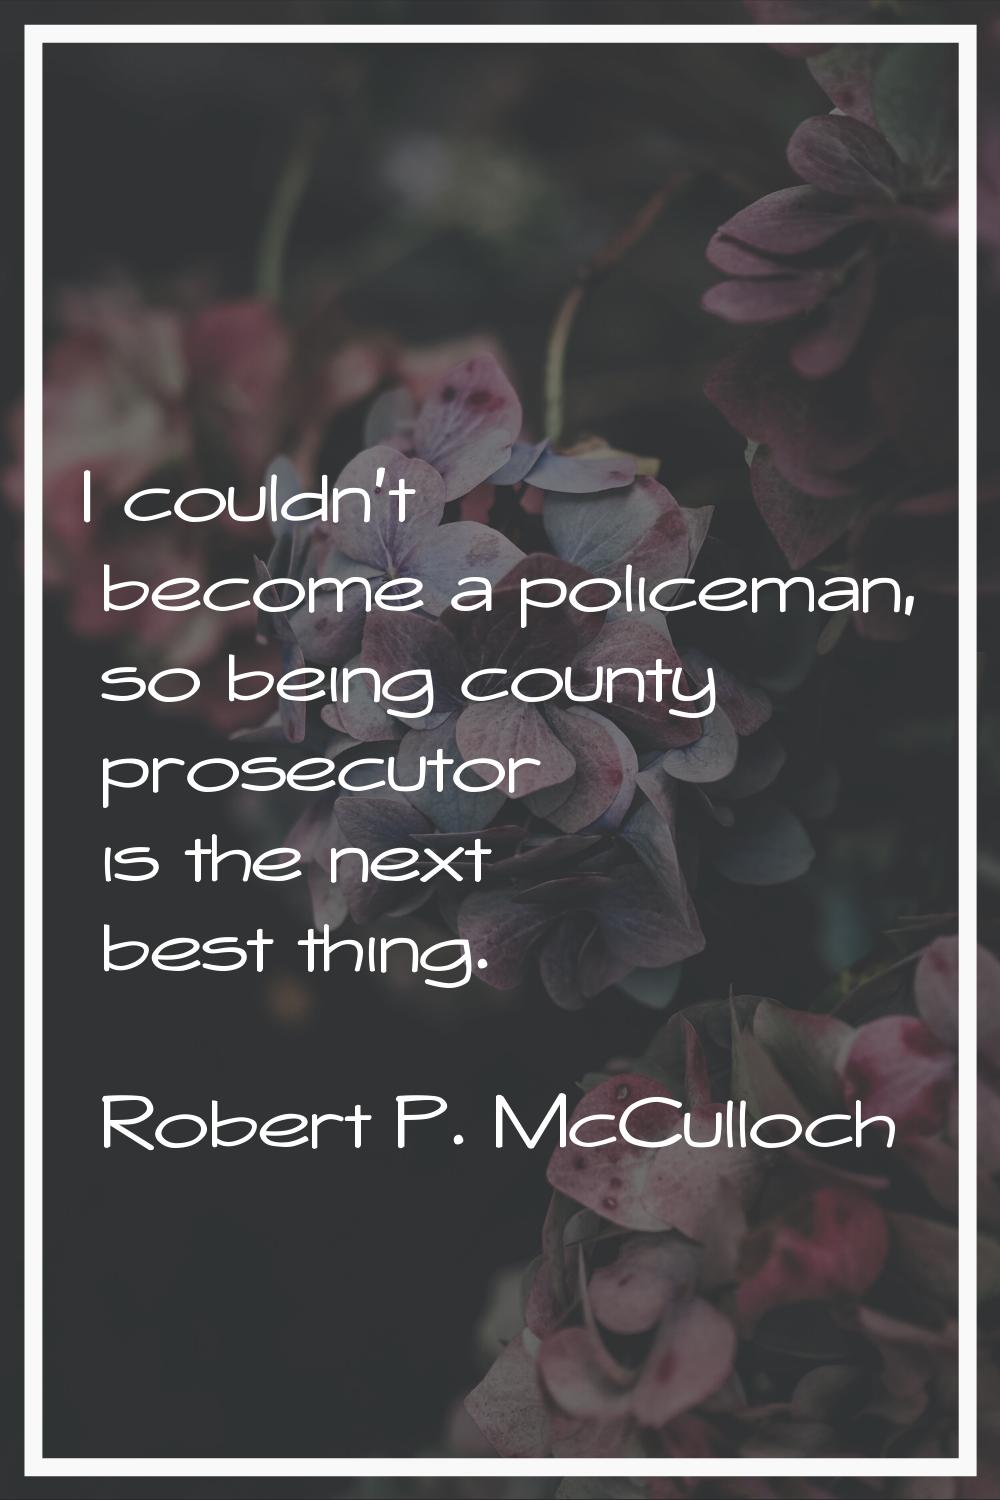 I couldn't become a policeman, so being county prosecutor is the next best thing.